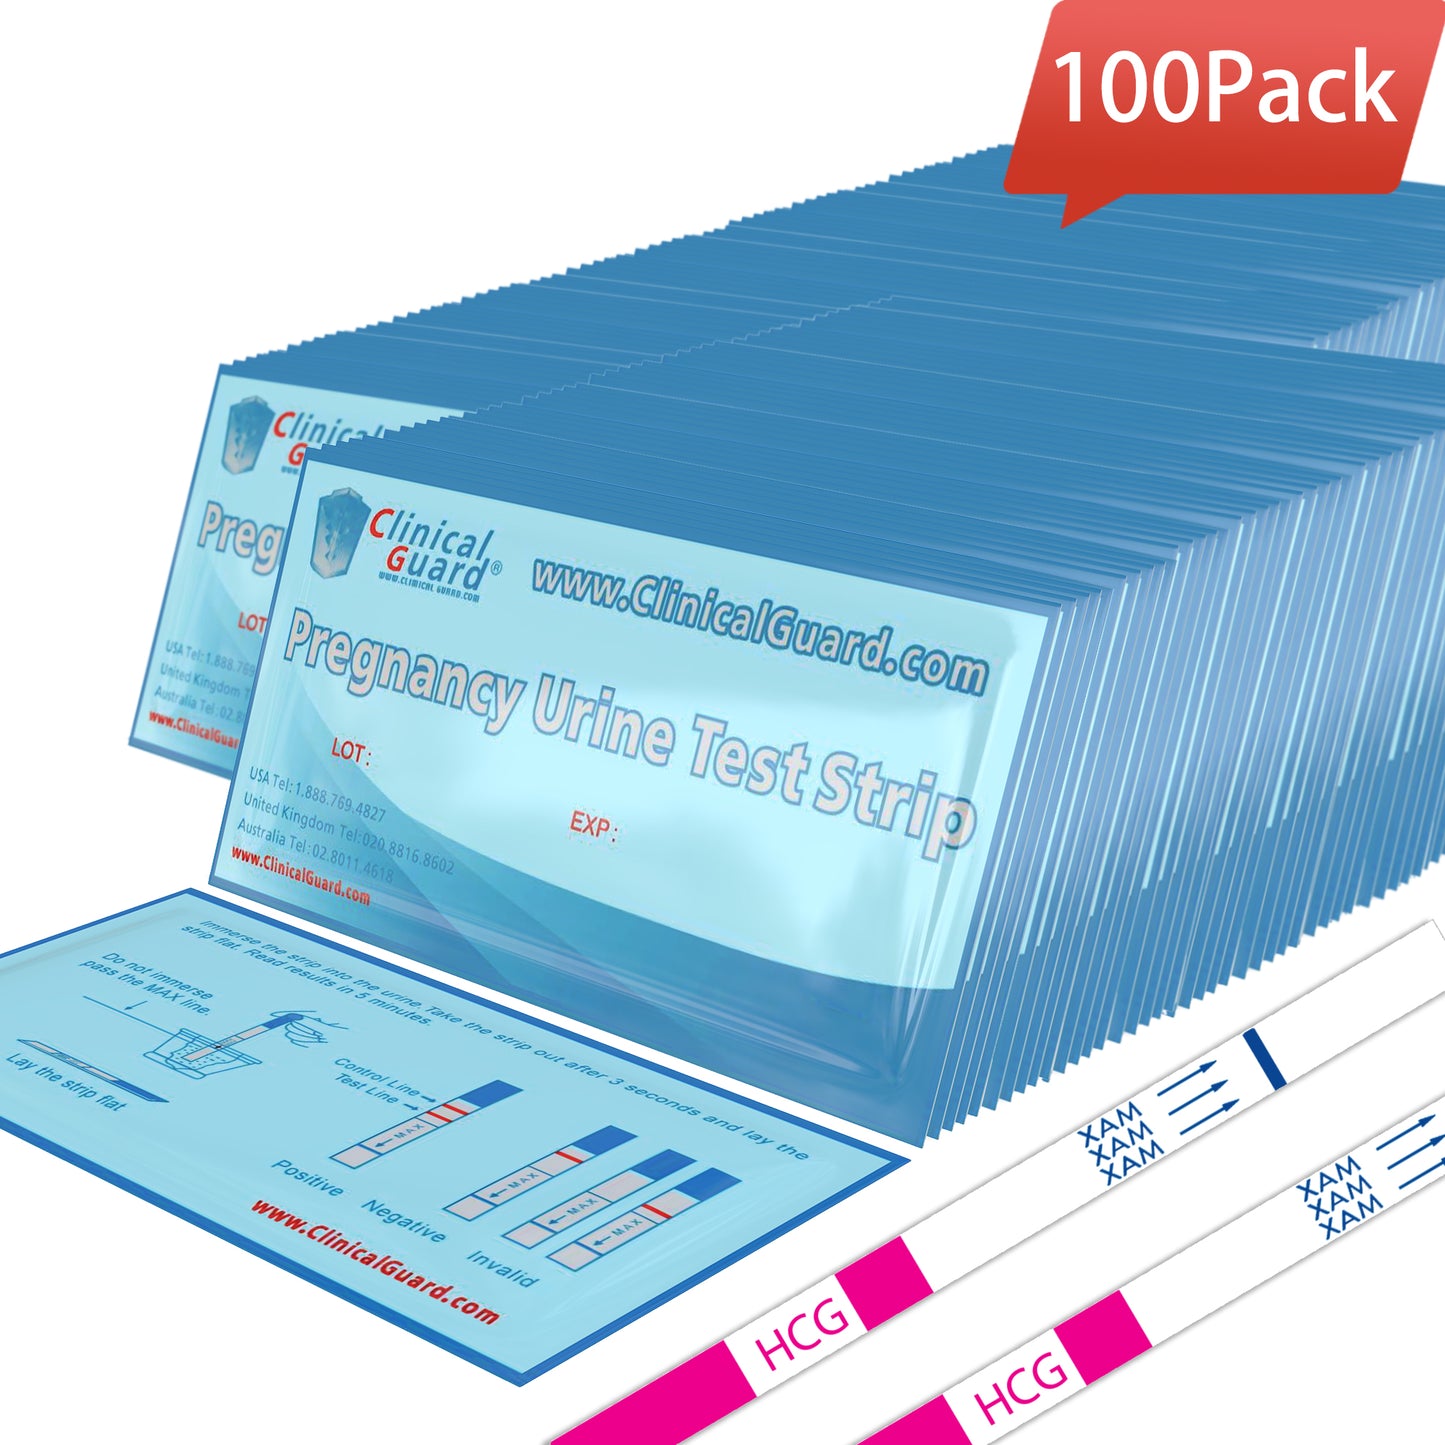 Clinical_Guard_Urine_Pregnancy_Test_Strips_hCG_100_Pack1